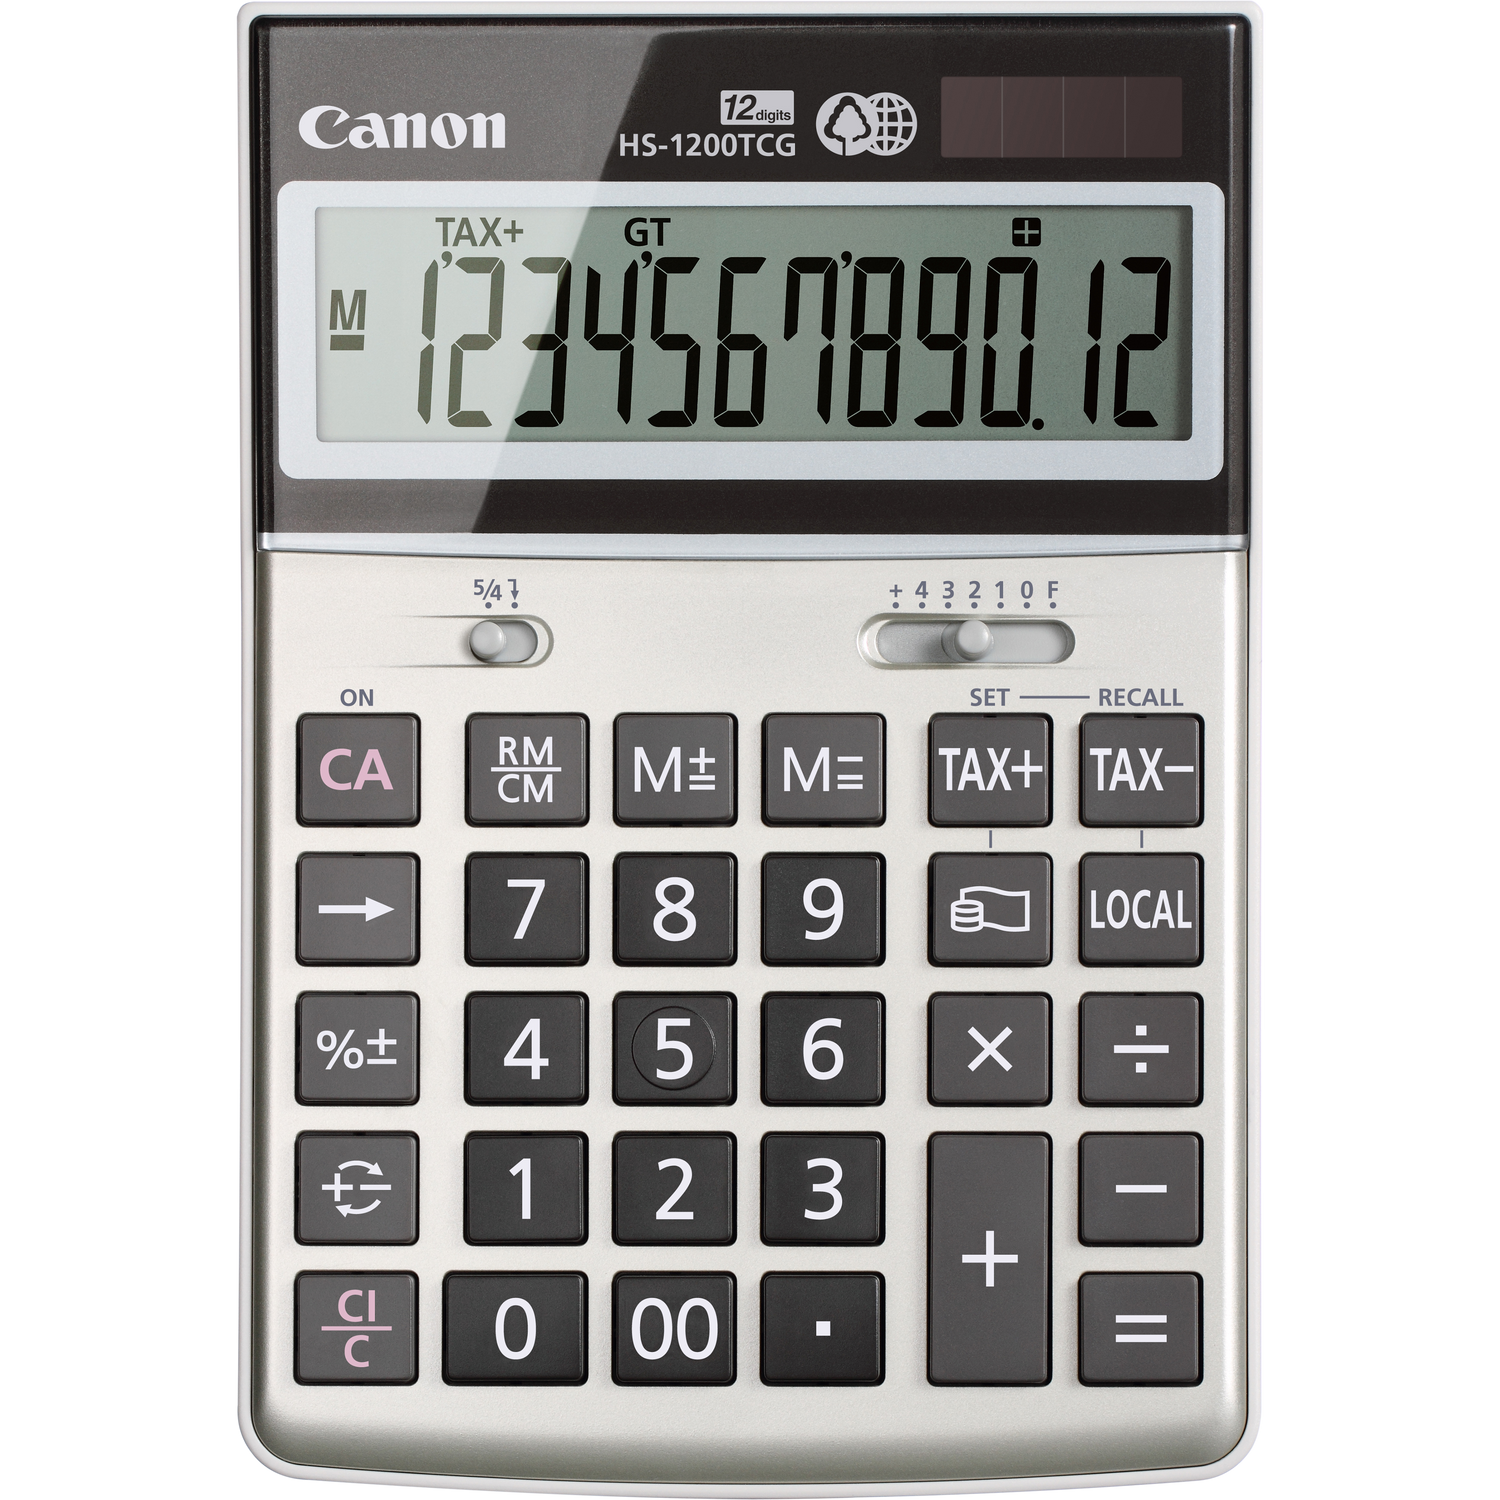 What Are Some Tips For Using A Canon Calculator?